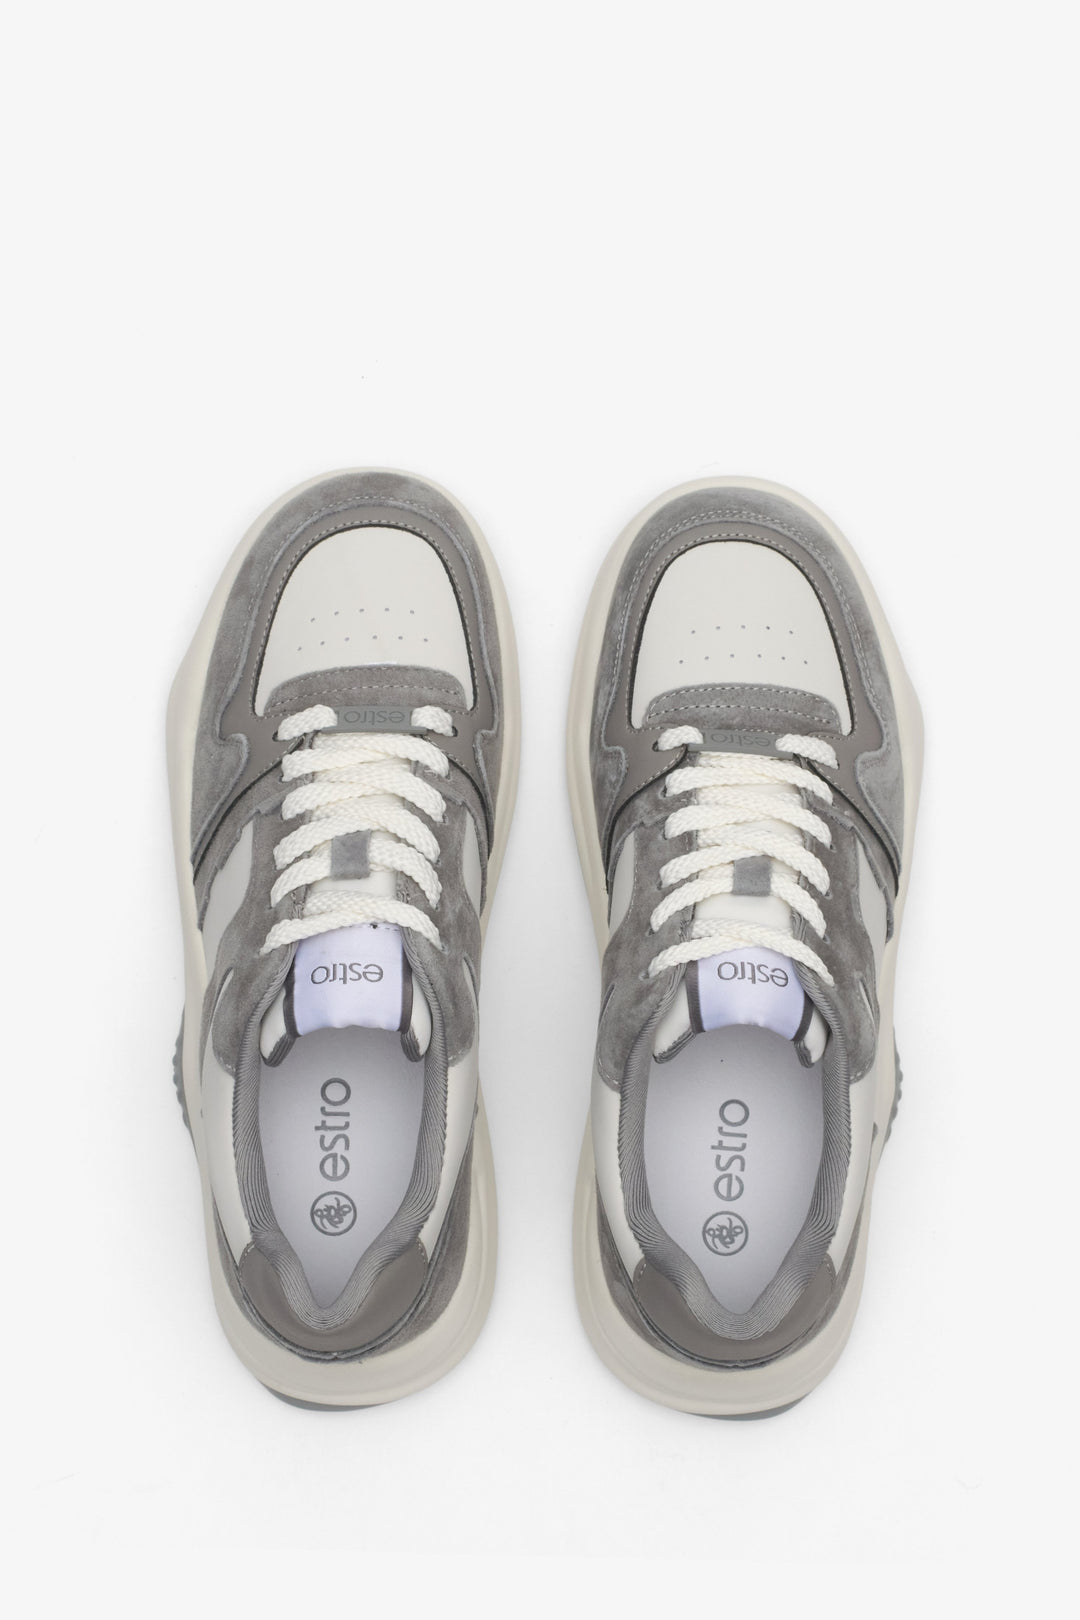 Women's grey and white casual sneakers - presentation of the footwear from above.